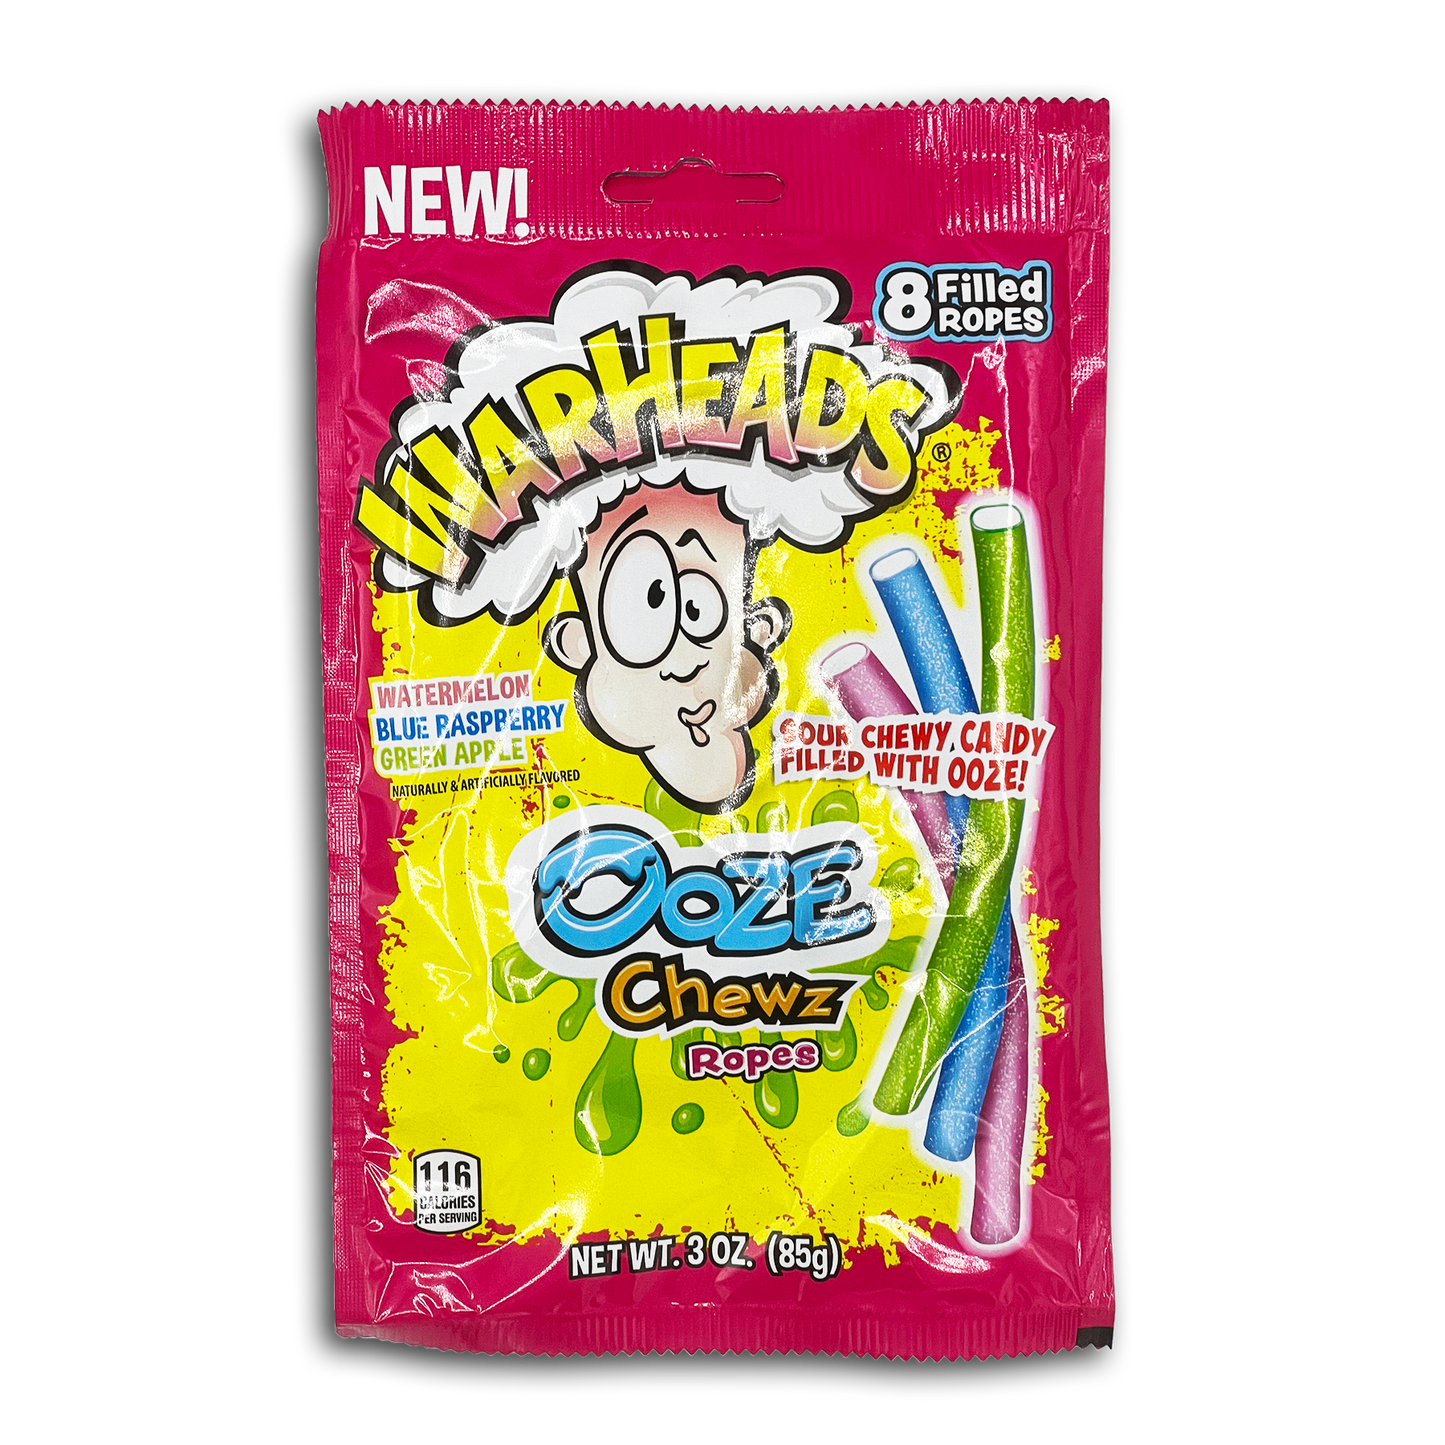 12PK WARHEADS OOZE CHEWZ ROPES CASE